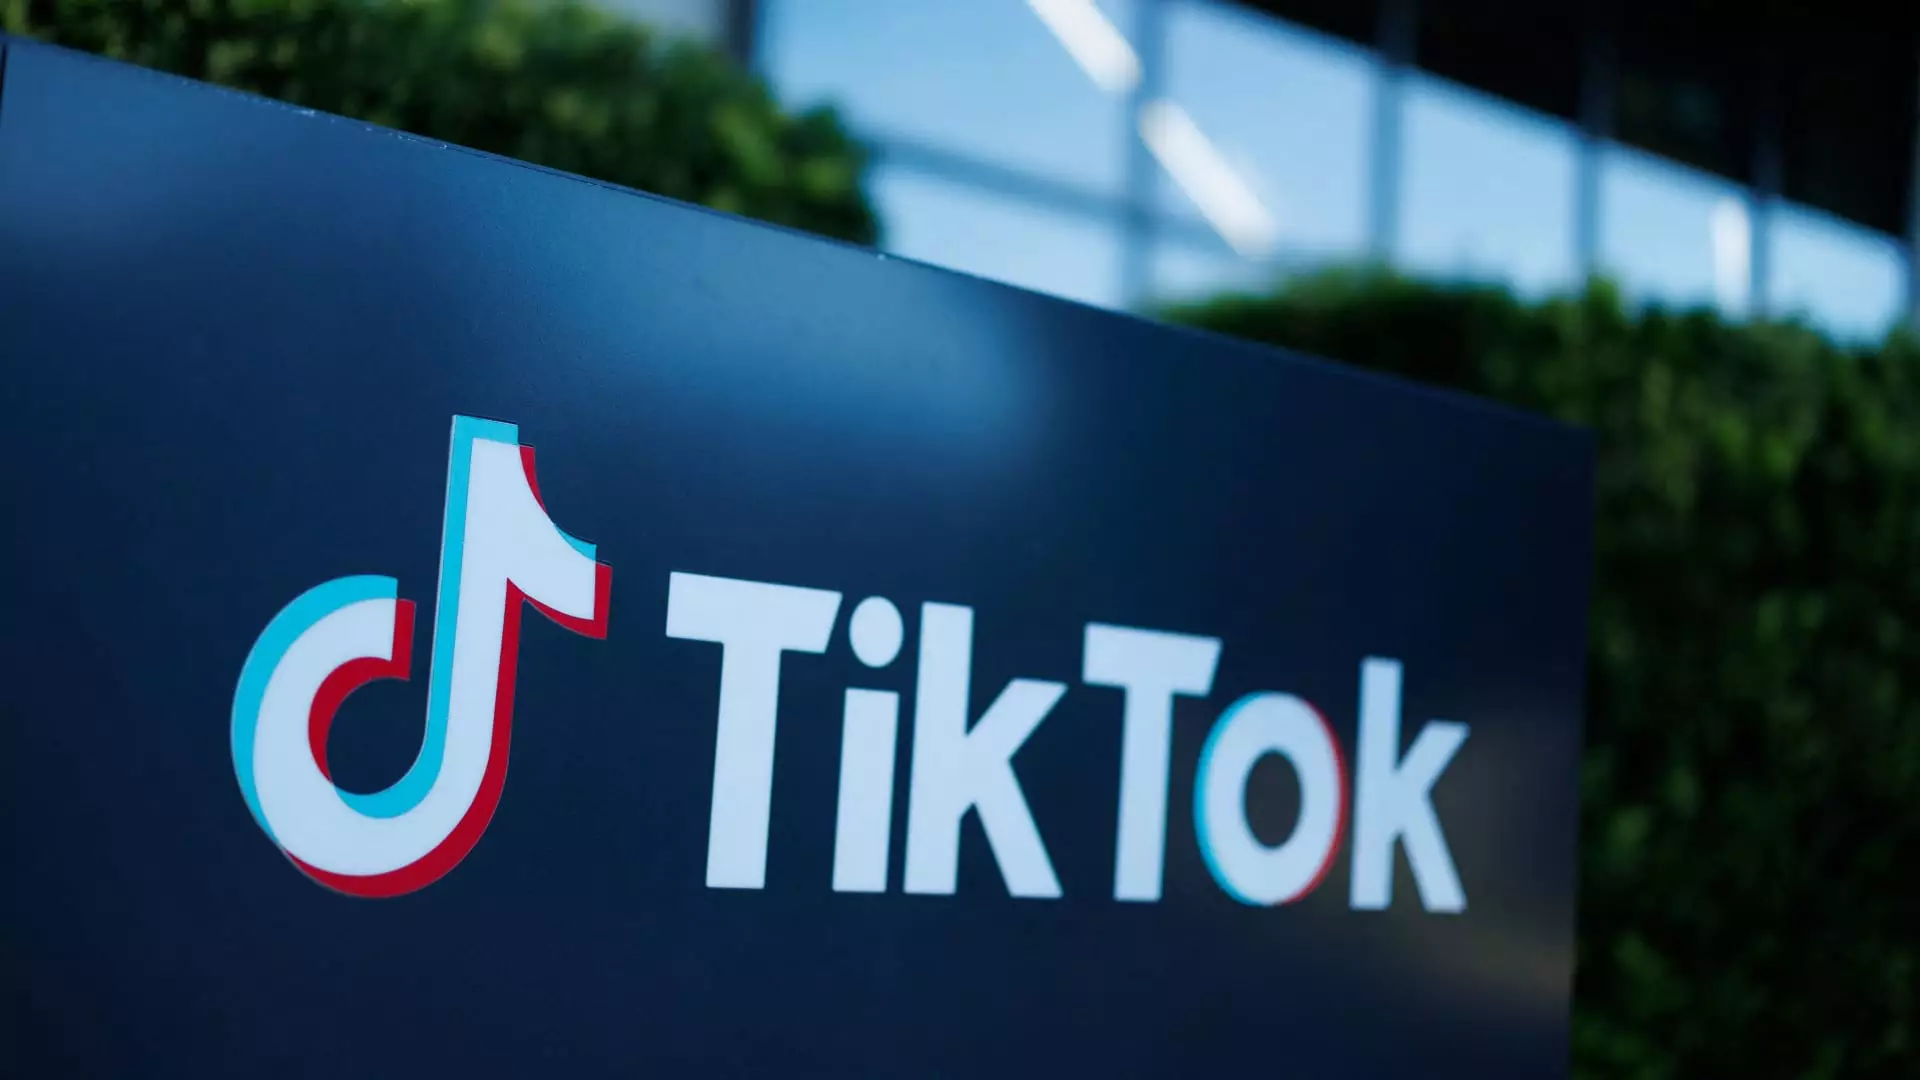 The Impending Purchase of TikTok: A Critical Analysis